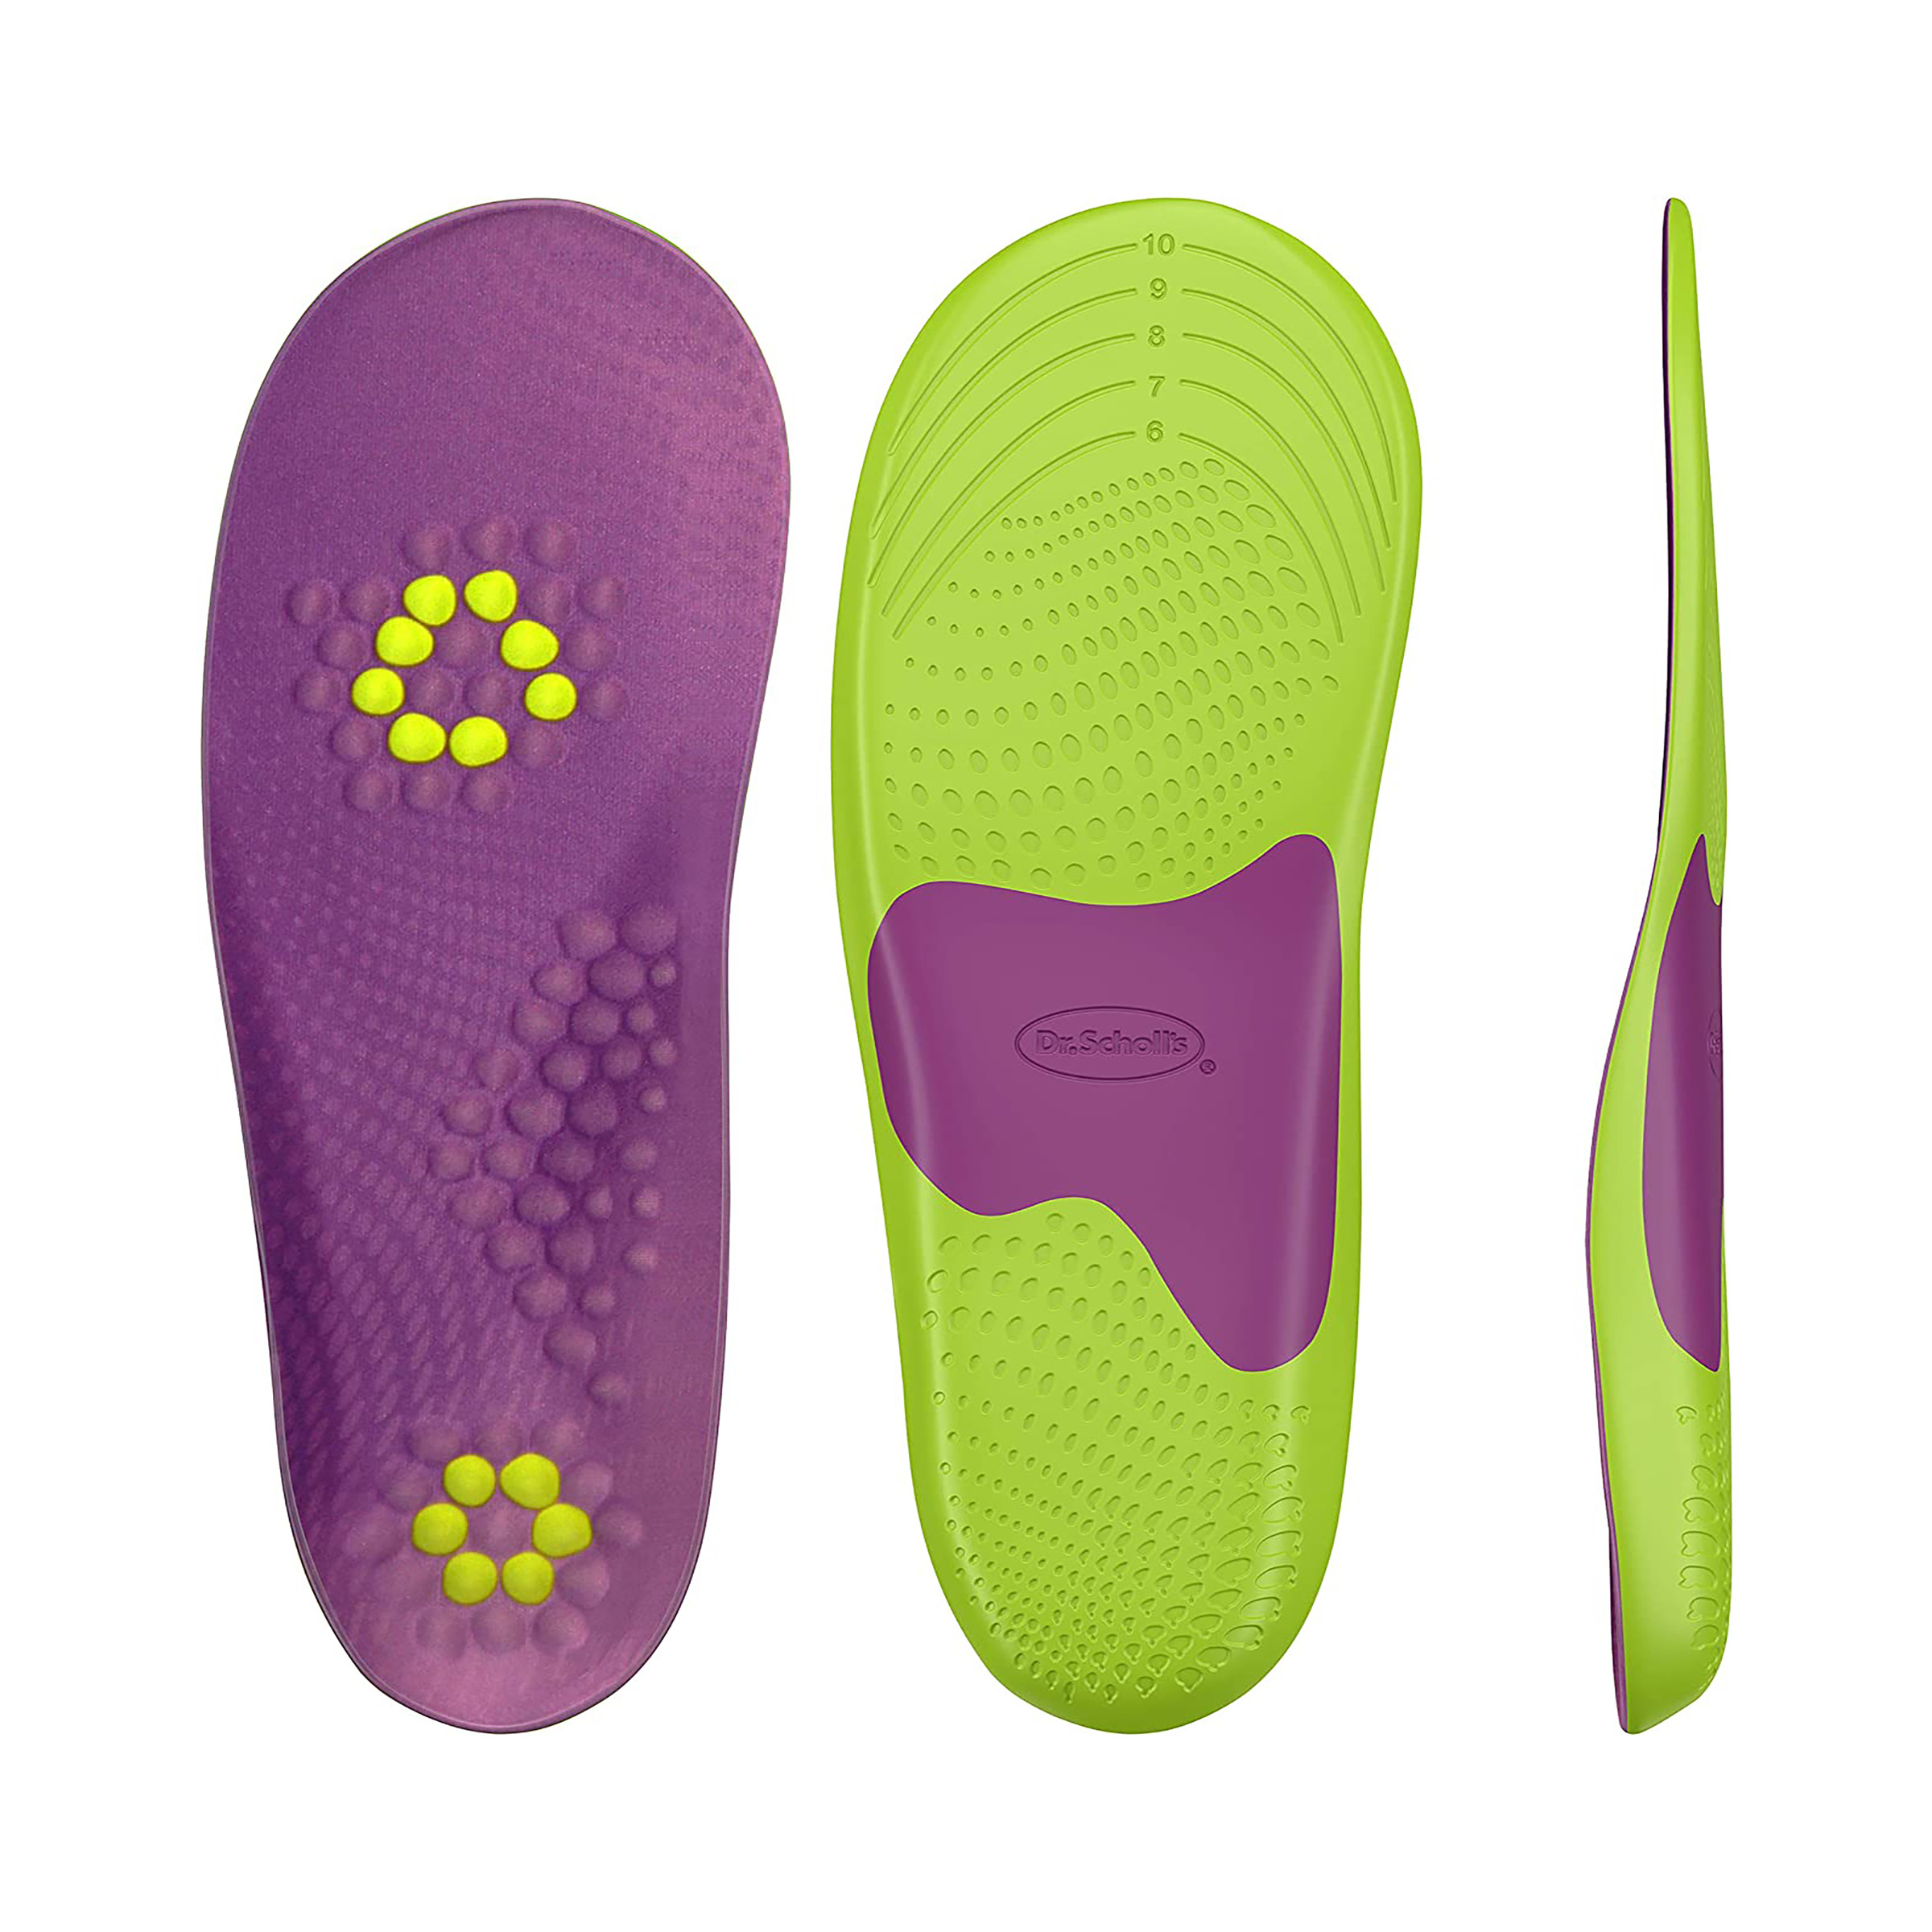 Dr. Scholl's Fitness Walking Insoles for Men (6-10) Inserts to Reduce Strain on your Lower Body - image 4 of 4